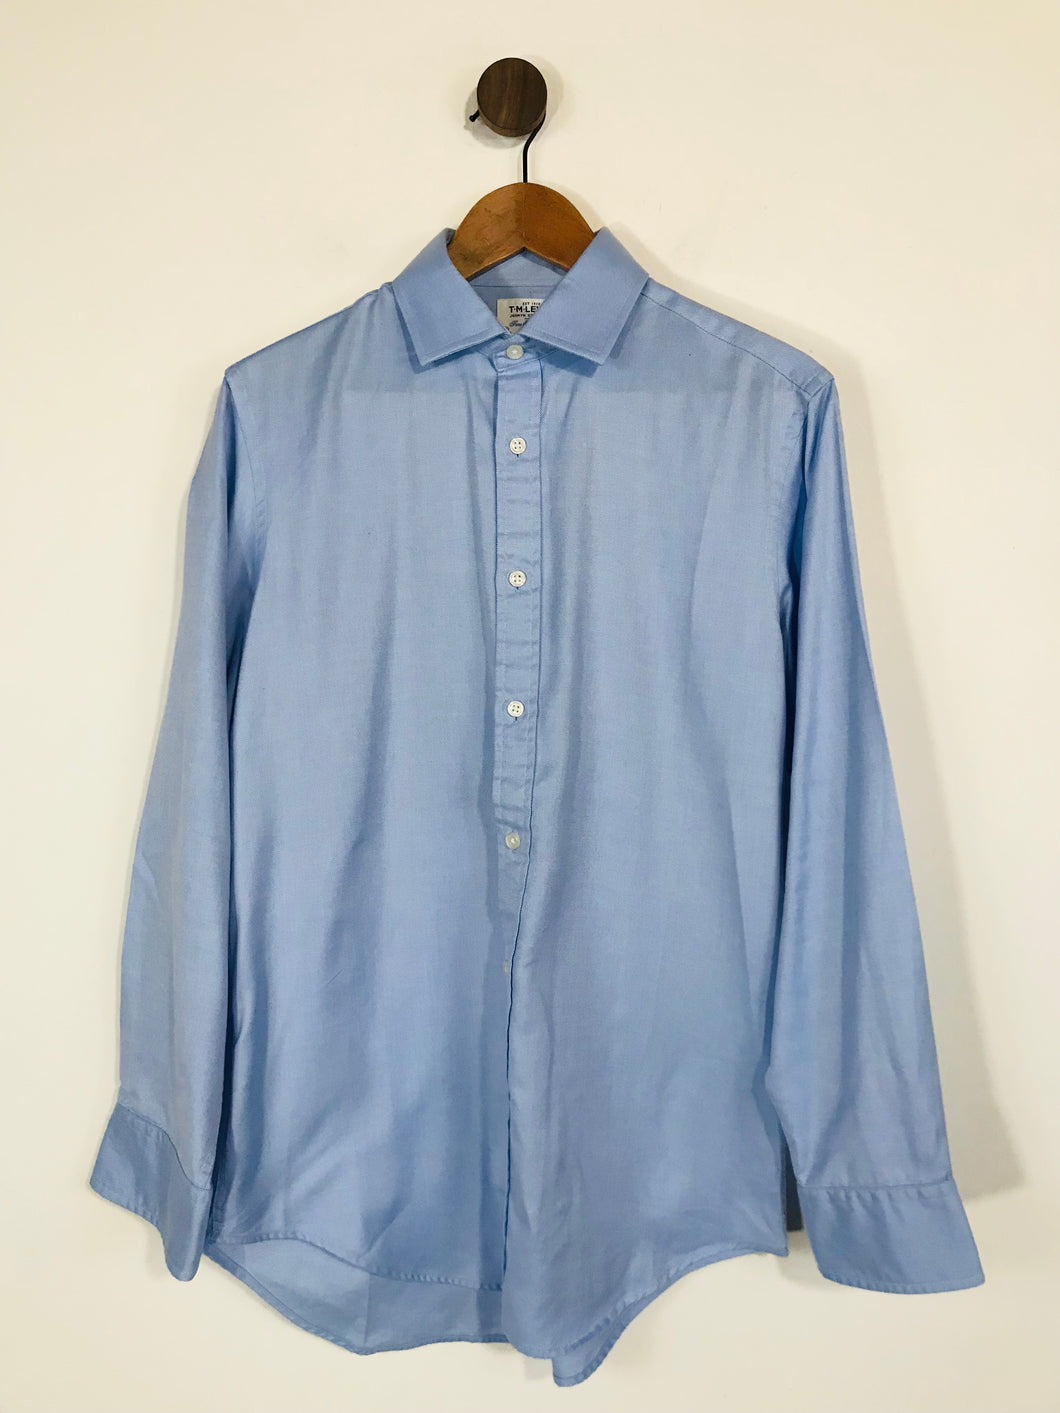 TM Lewin Men's Fitted Button-Up Shirt | 15.5 | Blue